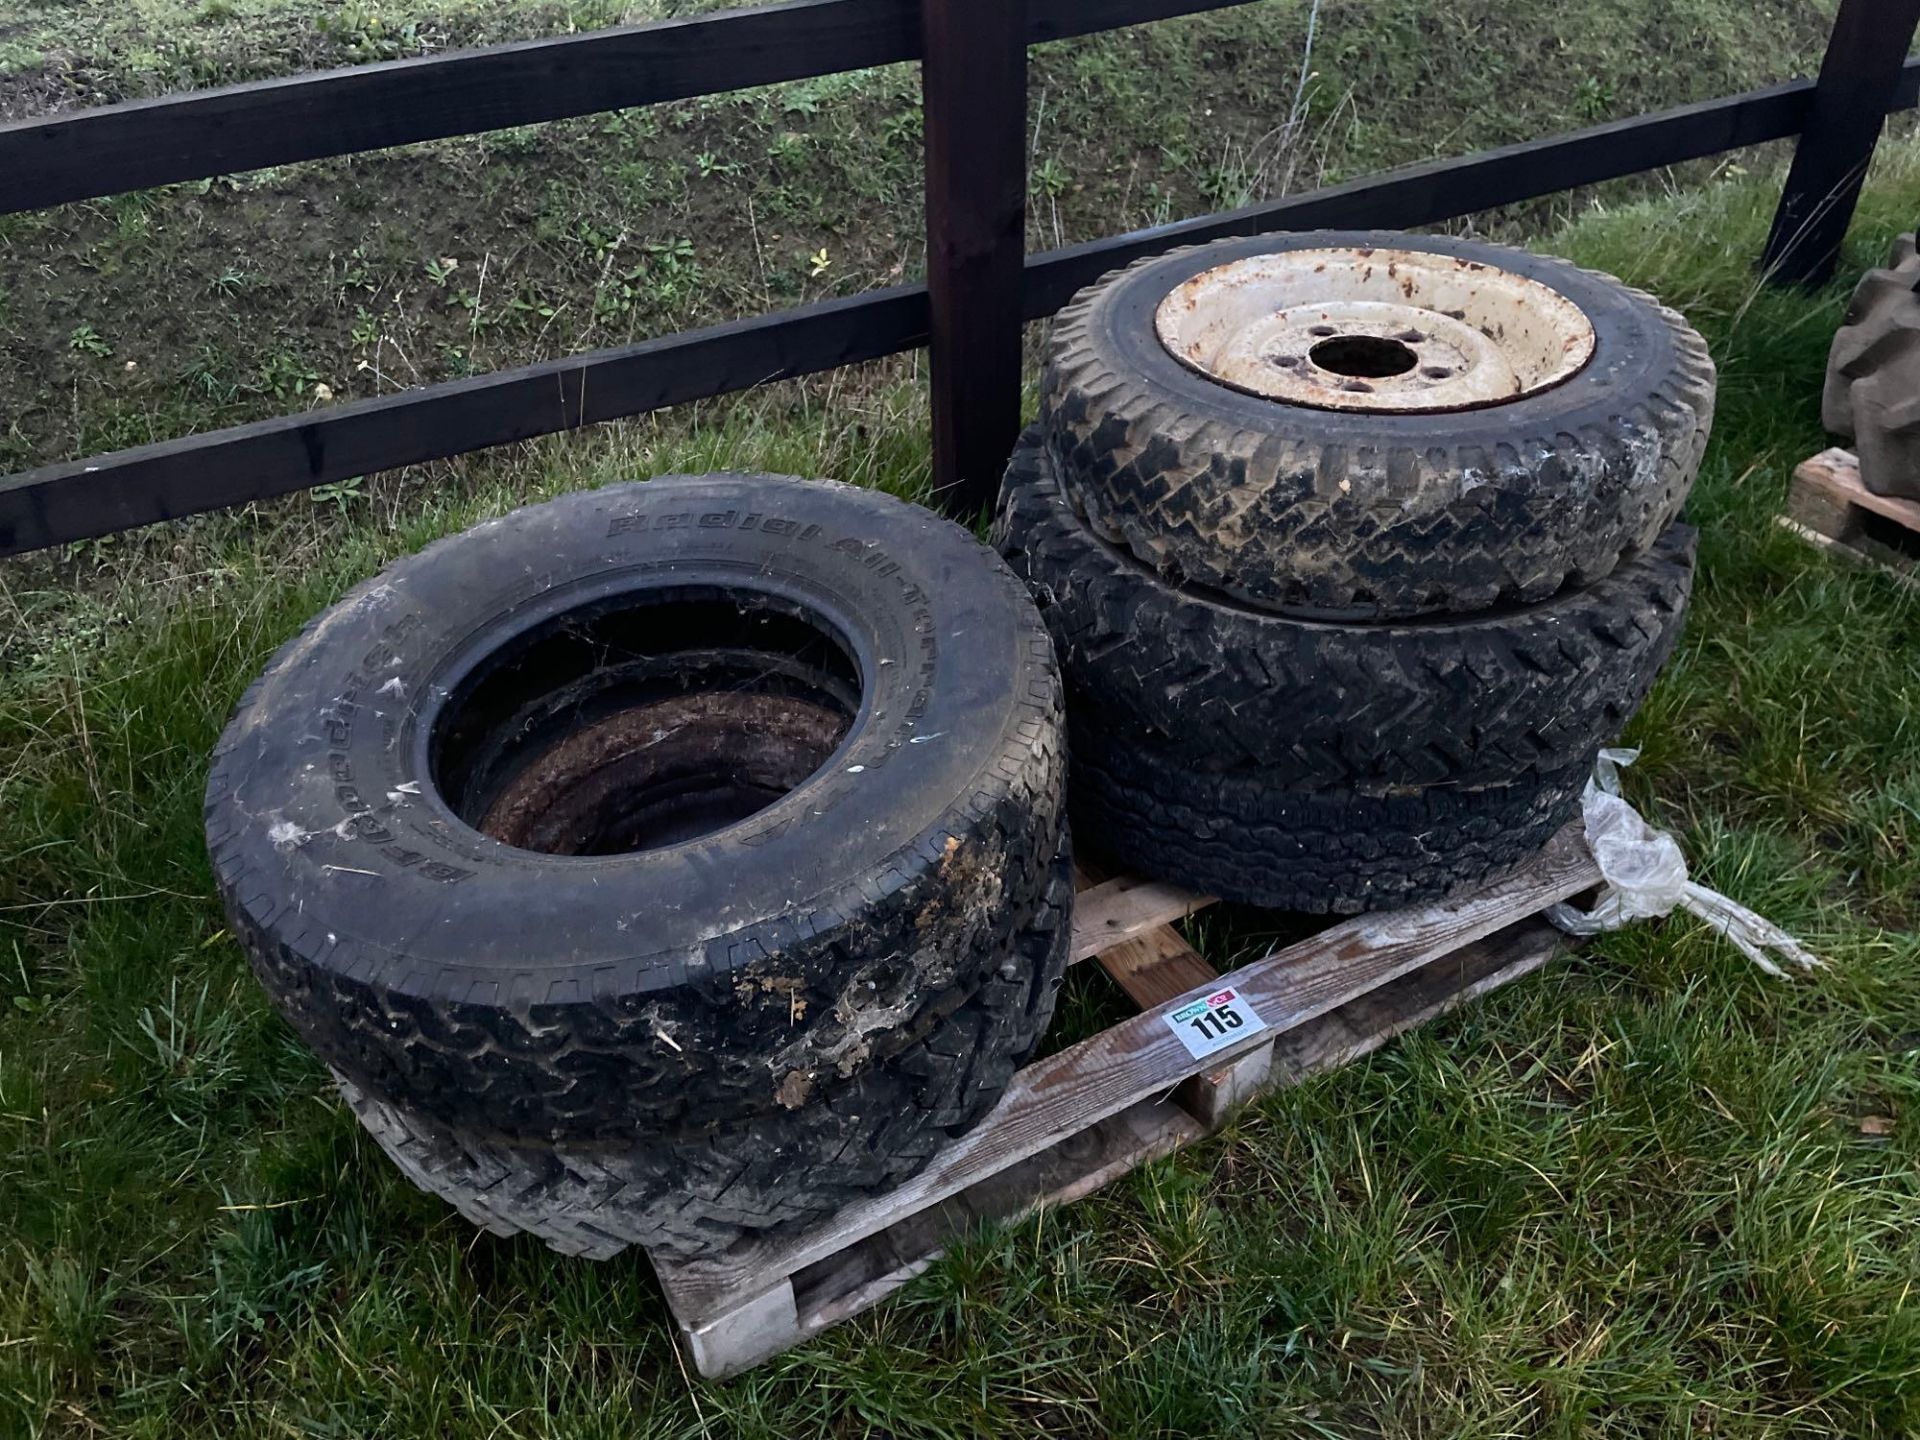 Miscellaneous Land Rover wheels and tyres